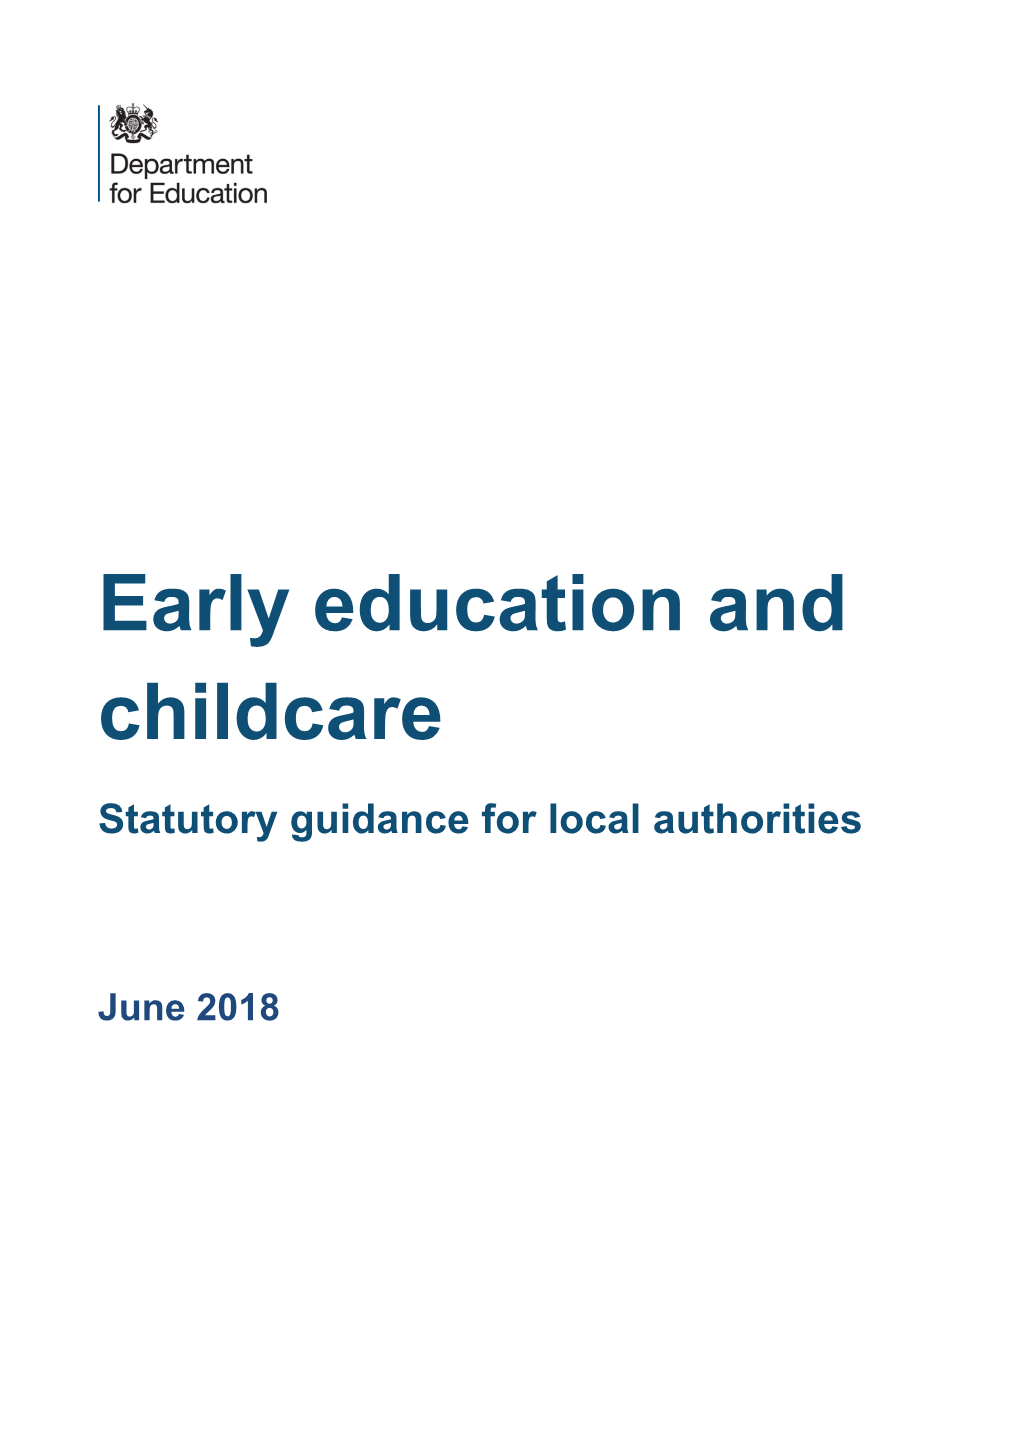 Early Education and Childcare Statutory Guidance for Local Authorities